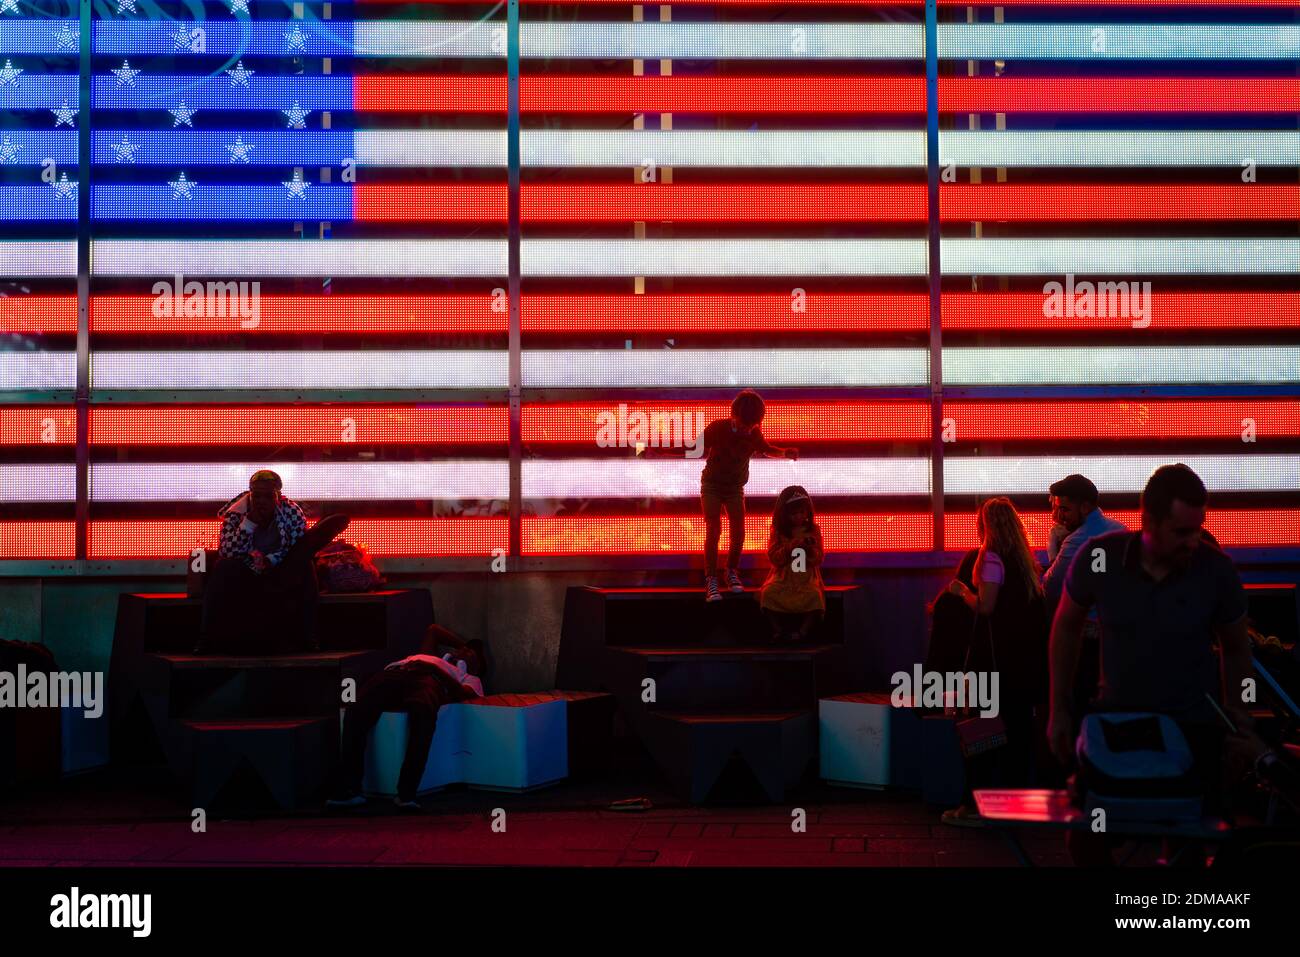 NEW YORK, UNITED STATES - Nov 18, 2020: Visitors to Times Square are silhouetted against an American flag in Manhattan, New York City. Stock Photo